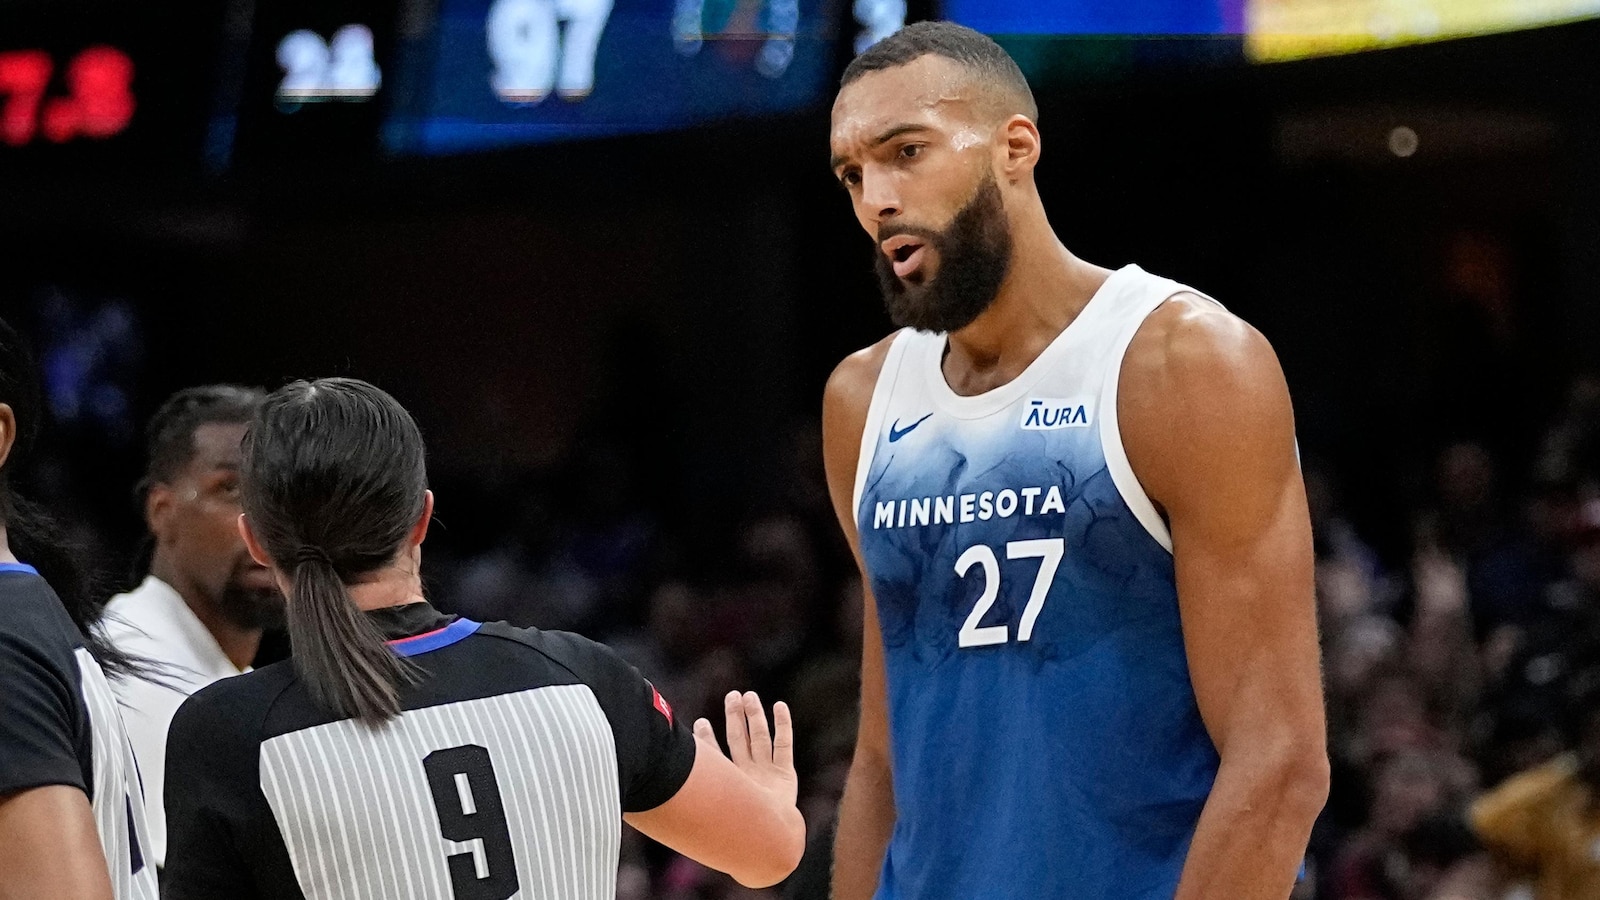 Rudy Gobert of the Timberwolves fined $100,000 for making 'money sign' gesture at referee